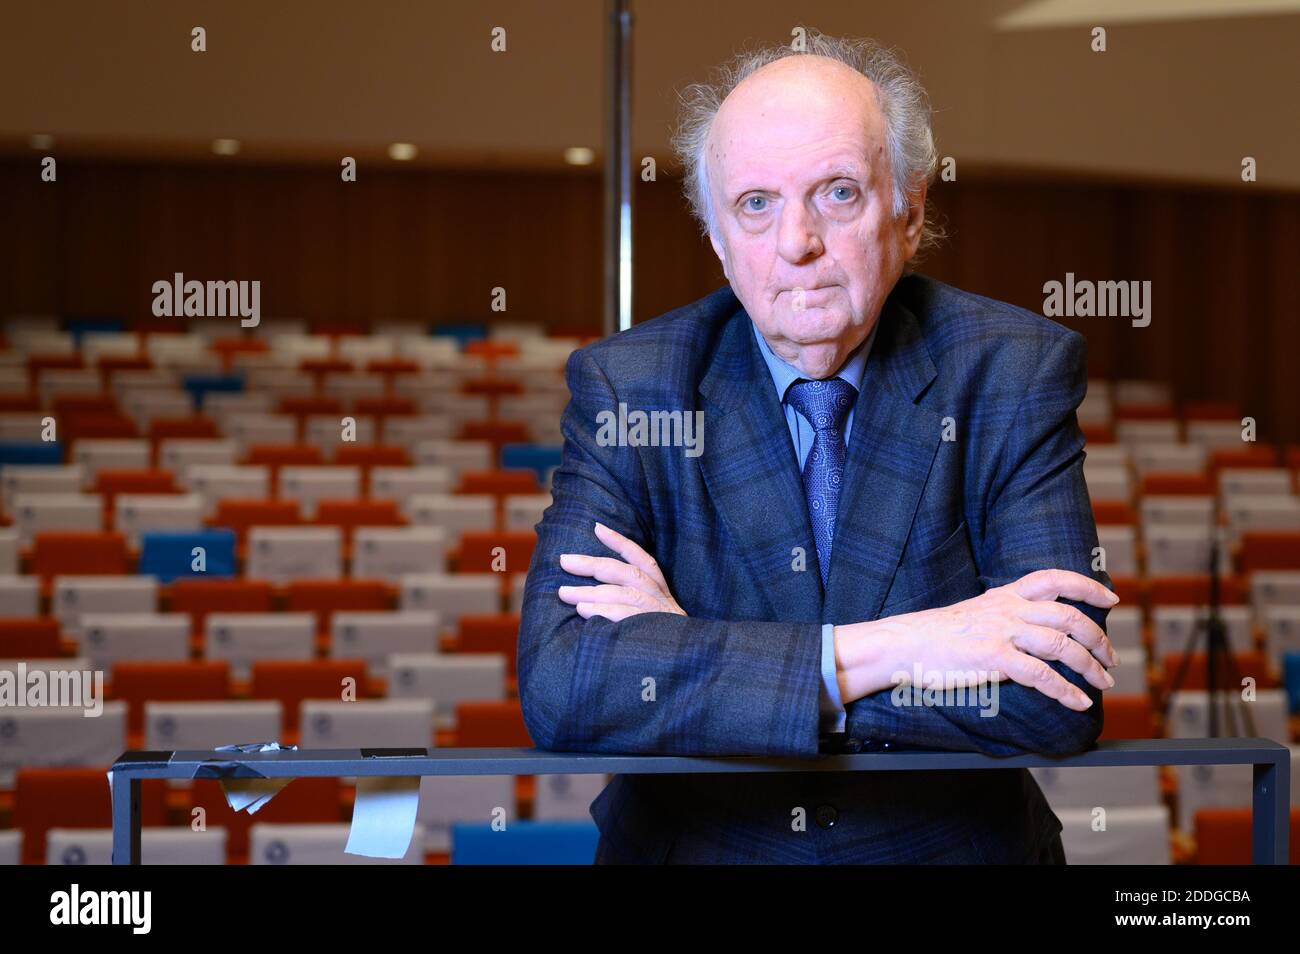 Dresden, Germany. 25th Nov, 2020. Marek Janowski, conductor of the Dresden Philharmonic, is sitting on the stage in front of the empty auditorium on the fringes of a press conference in the Kulturpalast. Janowski fears severe cuts for culture even after the Corona crisis has abated. Credit: Sebastian Kahnert/dpa-Zentralbild/dpa/Alamy Live News Stock Photo